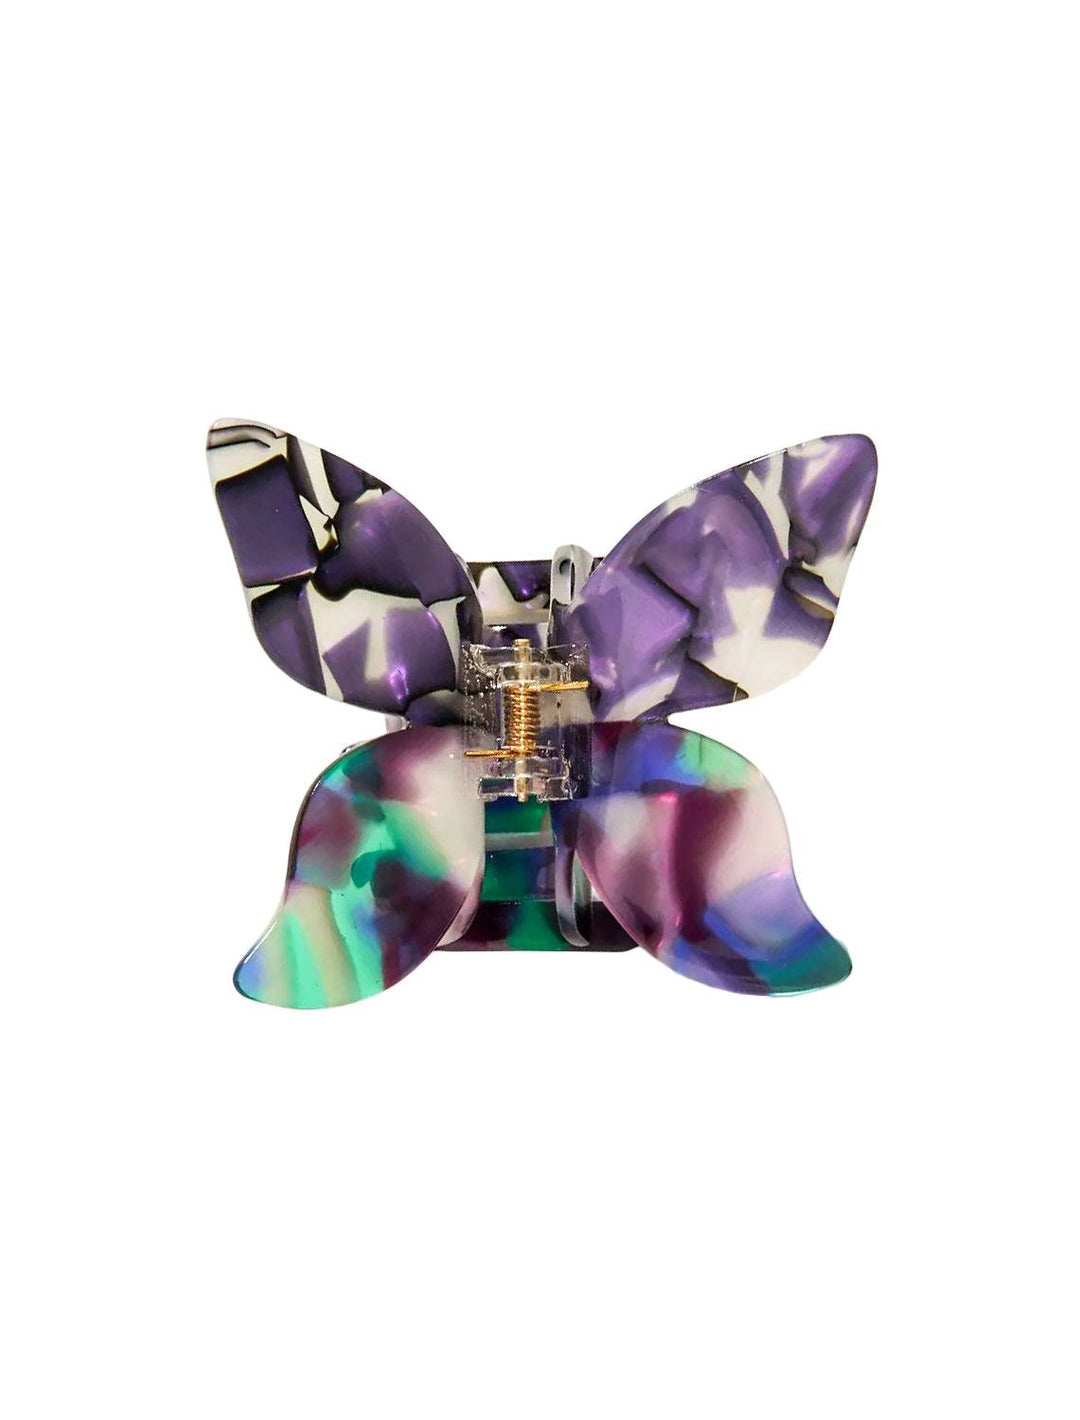 this hair claw has a butterfly shape. when clipped in hair, it looks like a butterfly is resting on your hair. perfect for casual style or semi-formal updo. this hair claw features deep purple tones with some blue and green tones.